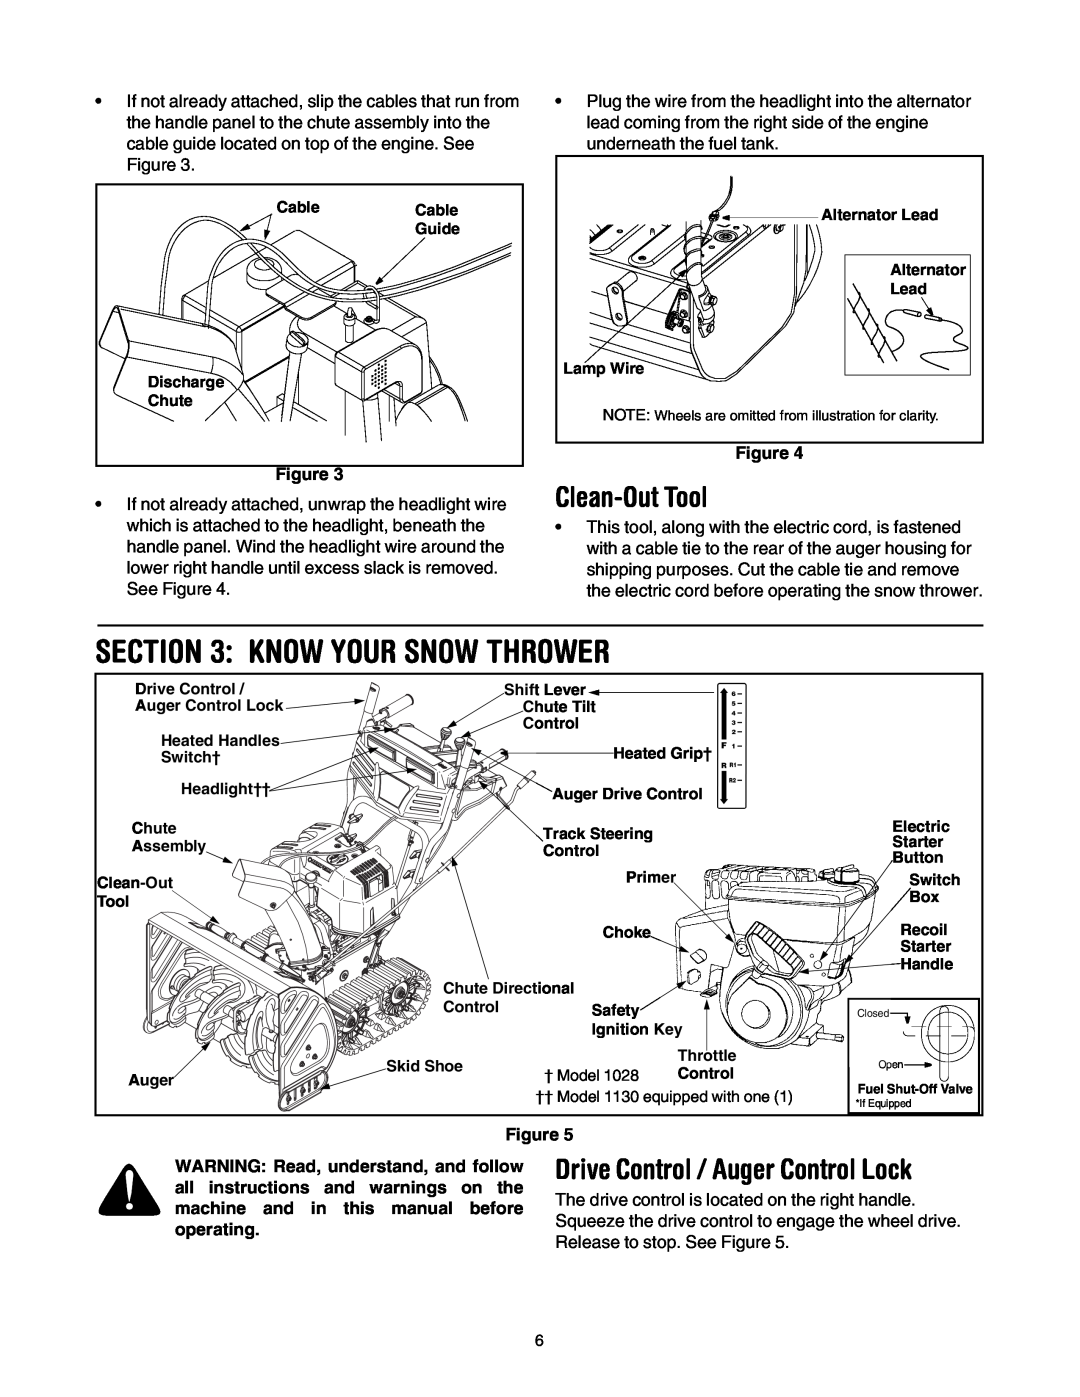 Troy-Bilt 1130, 1028 manual Know Your Snow Thrower, Clean-OutTool, Drive Control / Auger Control Lock 